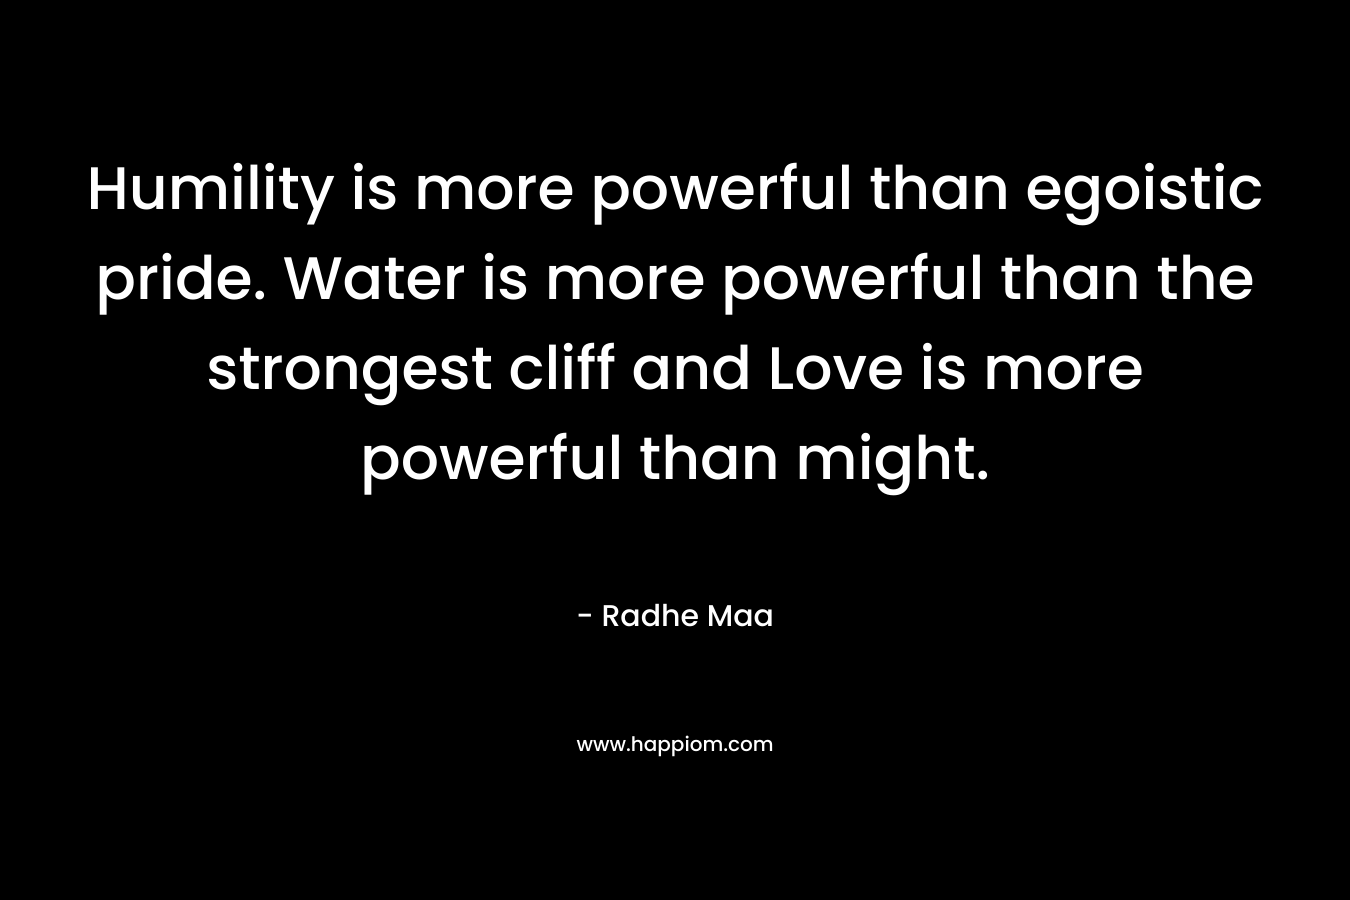 Humility is more powerful than egoistic pride. Water is more powerful than the strongest cliff and Love is more powerful than might.